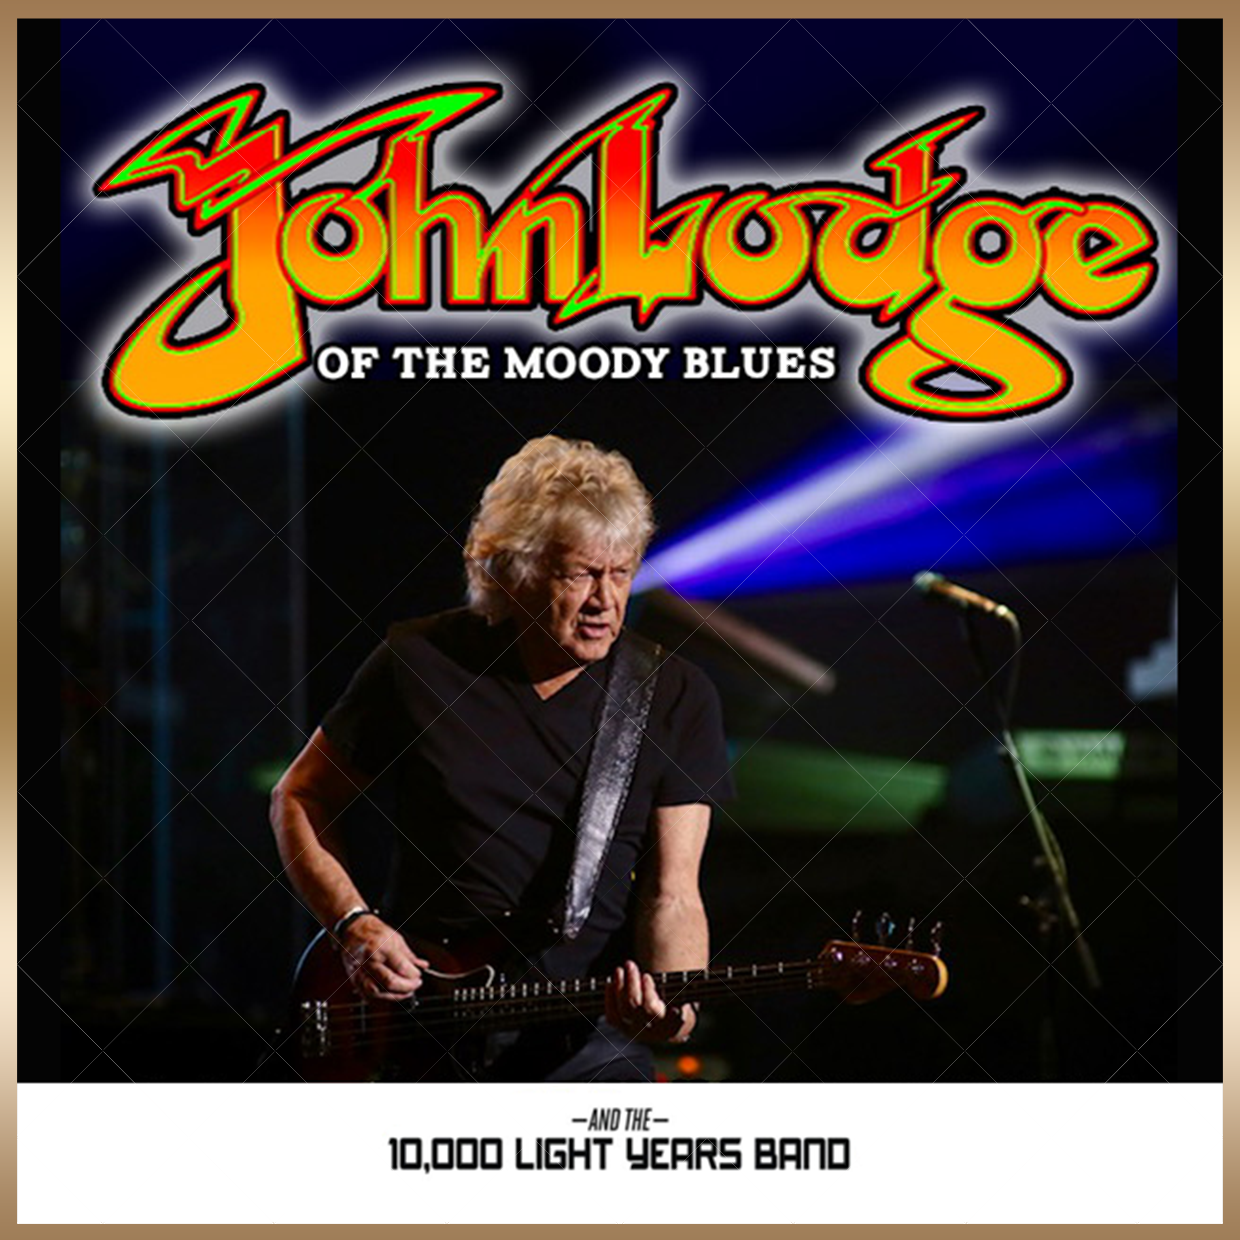 Classic Rock Here And Now: JOHN LODGE MOODY BLUES LEGEND SPECIAL GUEST ...